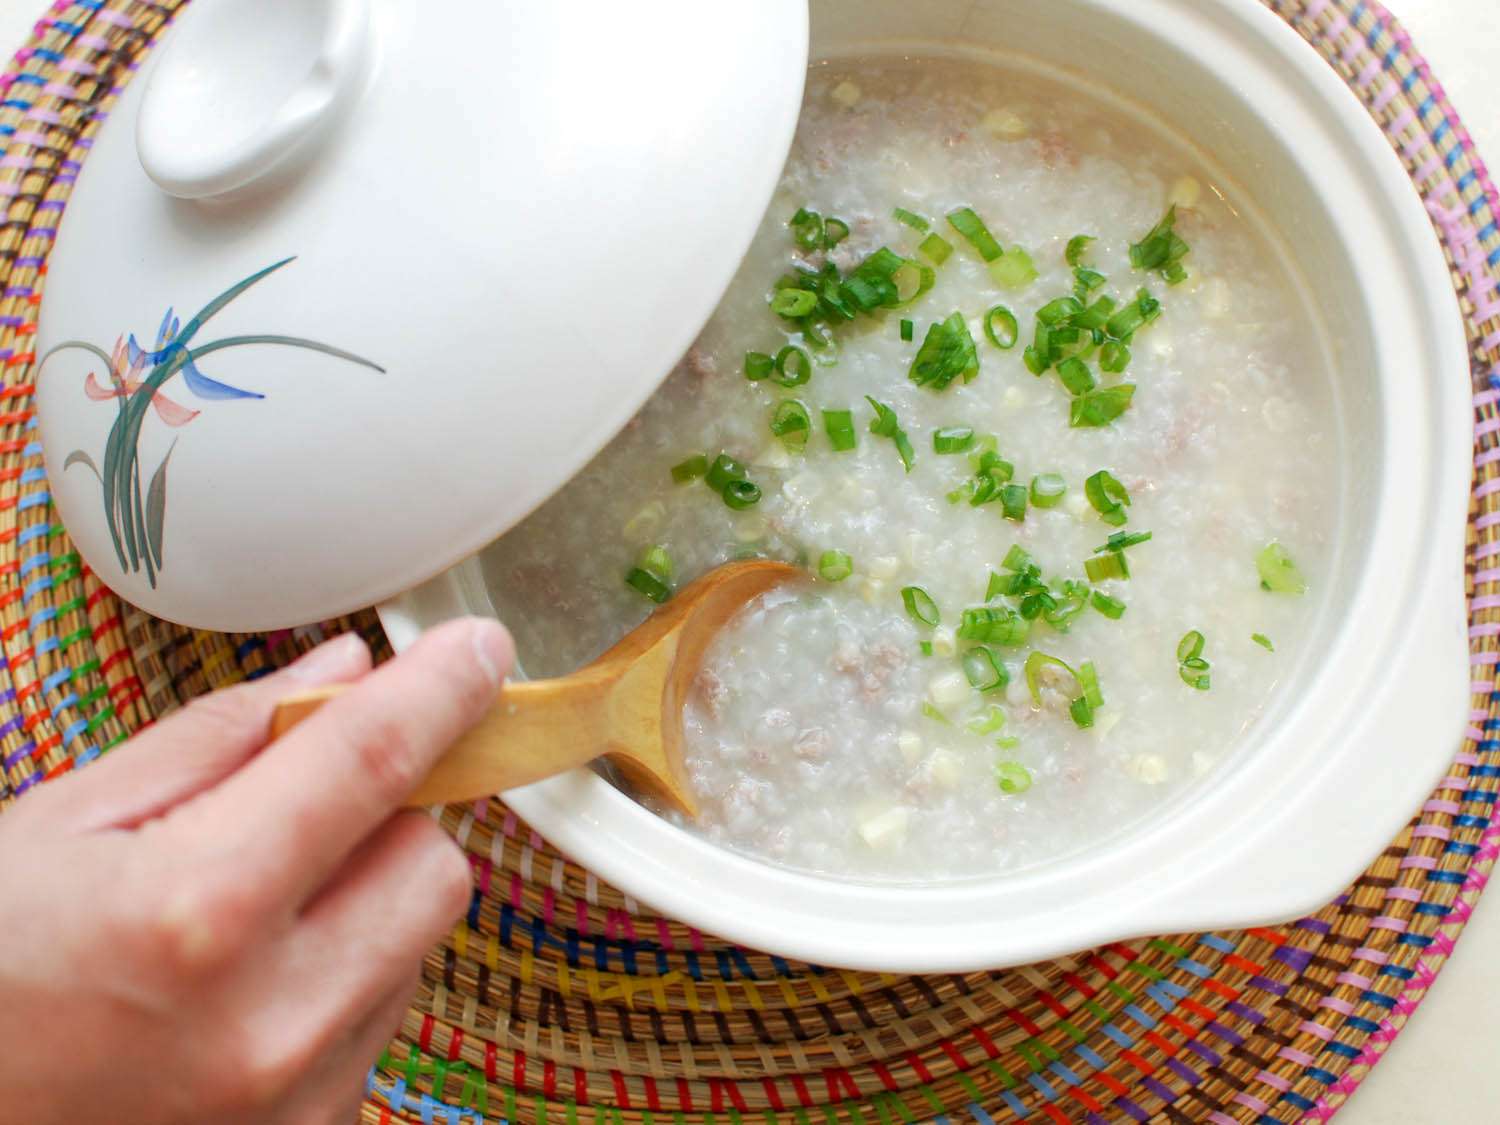 Stirring finished congee with a wooden spoon.